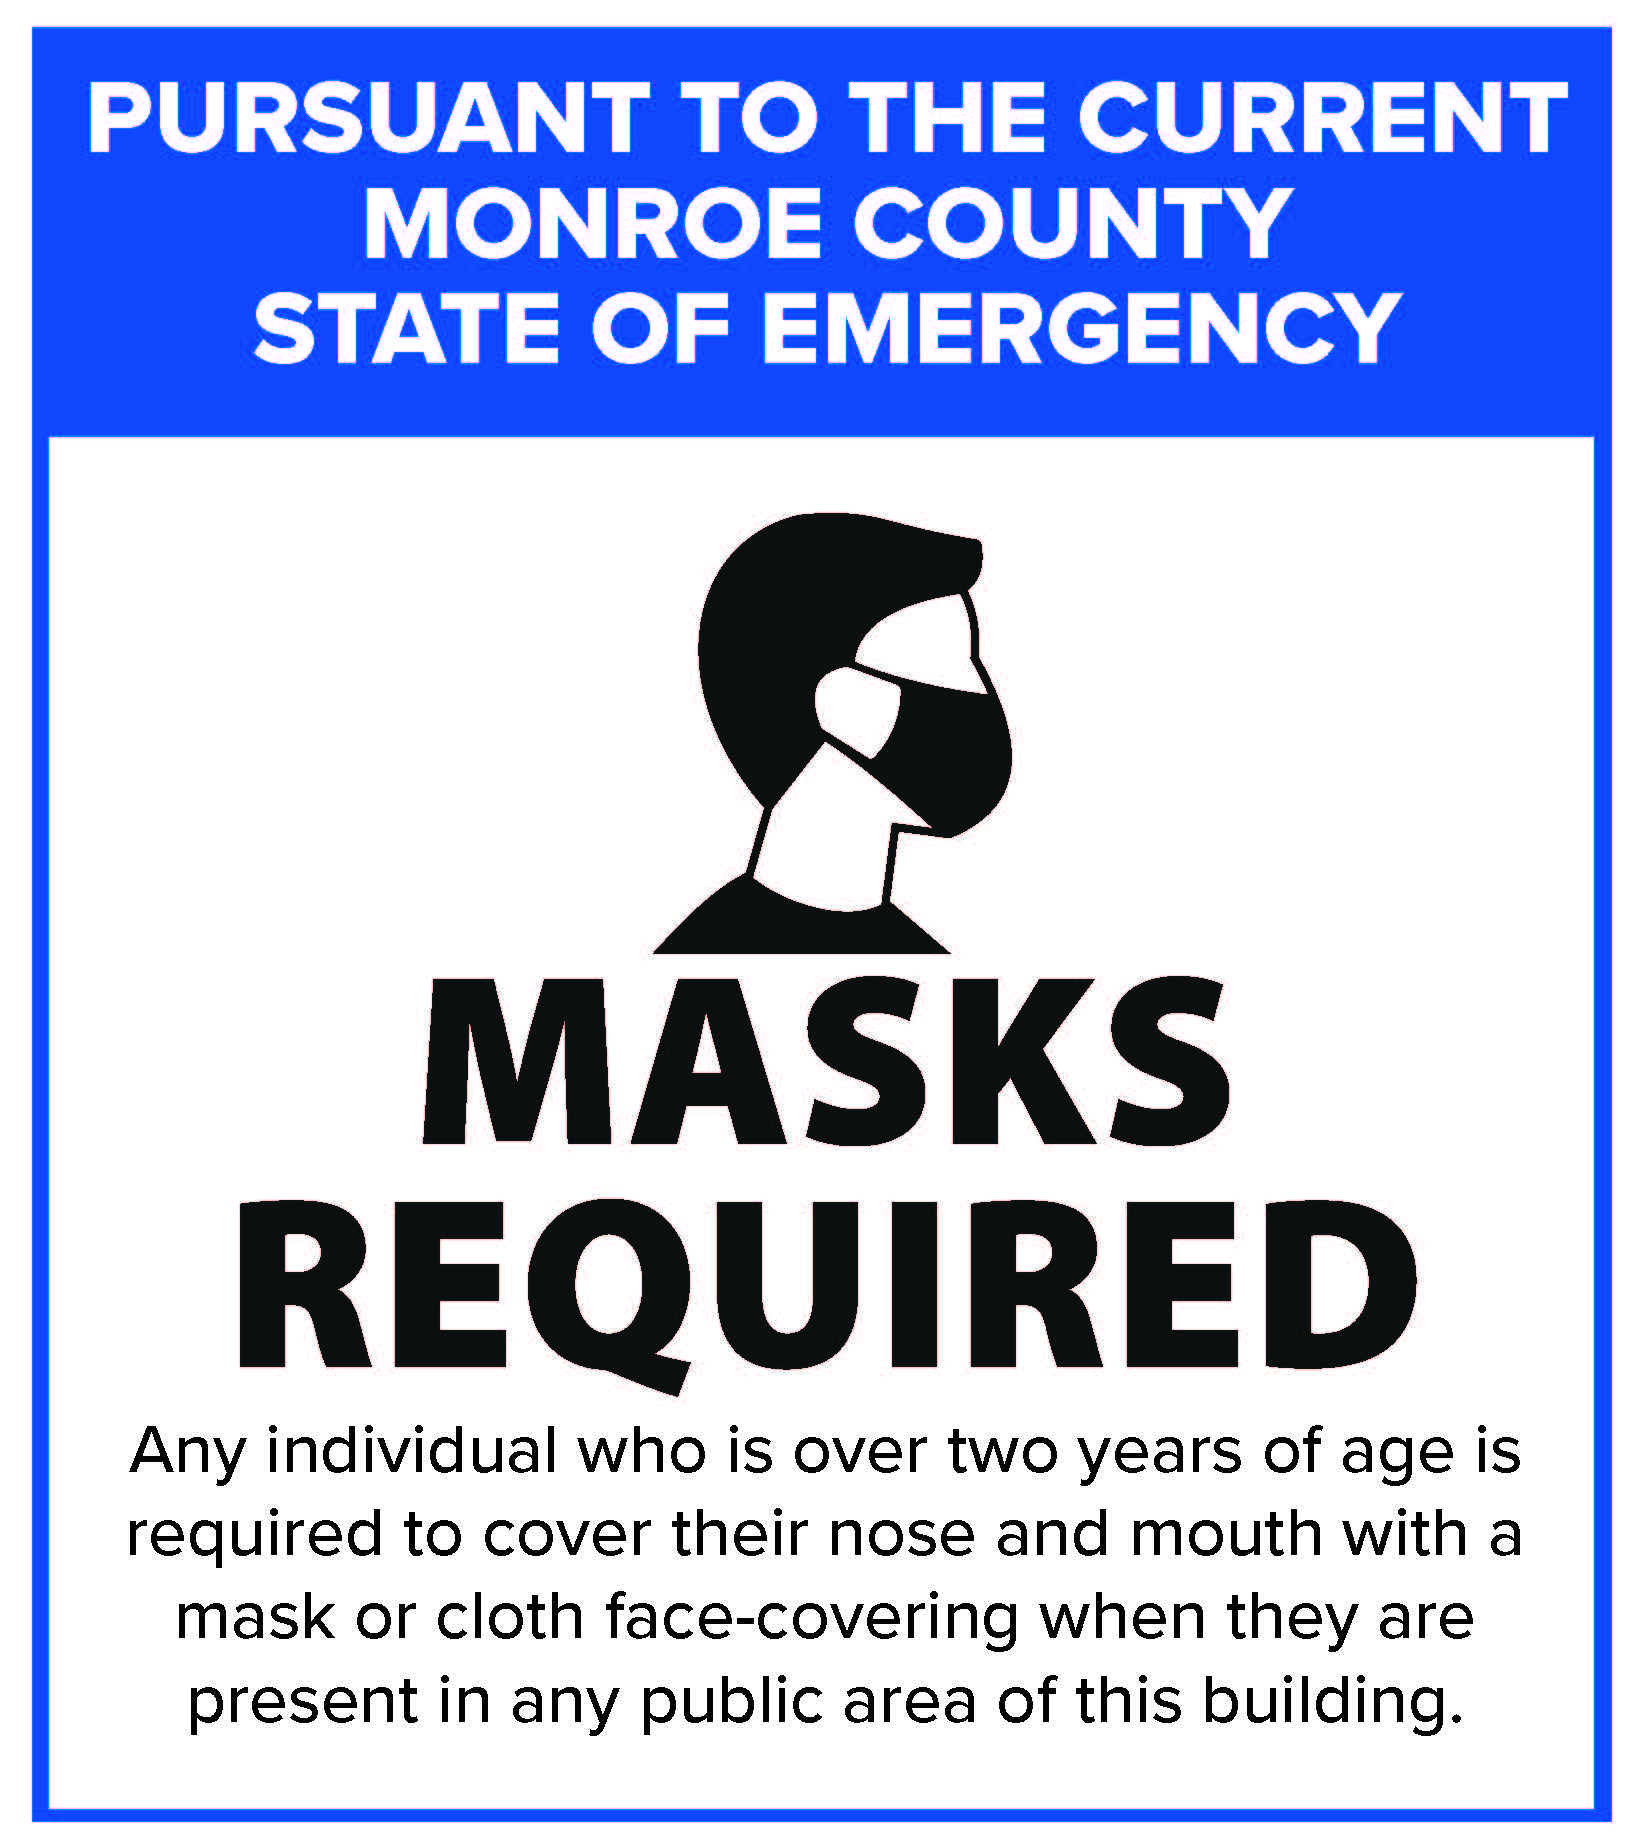 Pursuant to the current Monroe County State of Emergency masks are required. Any individual who is over two years of age is required to cover their nose and mouth with a mask or cloth face-covering when they are present in any public area of this building.